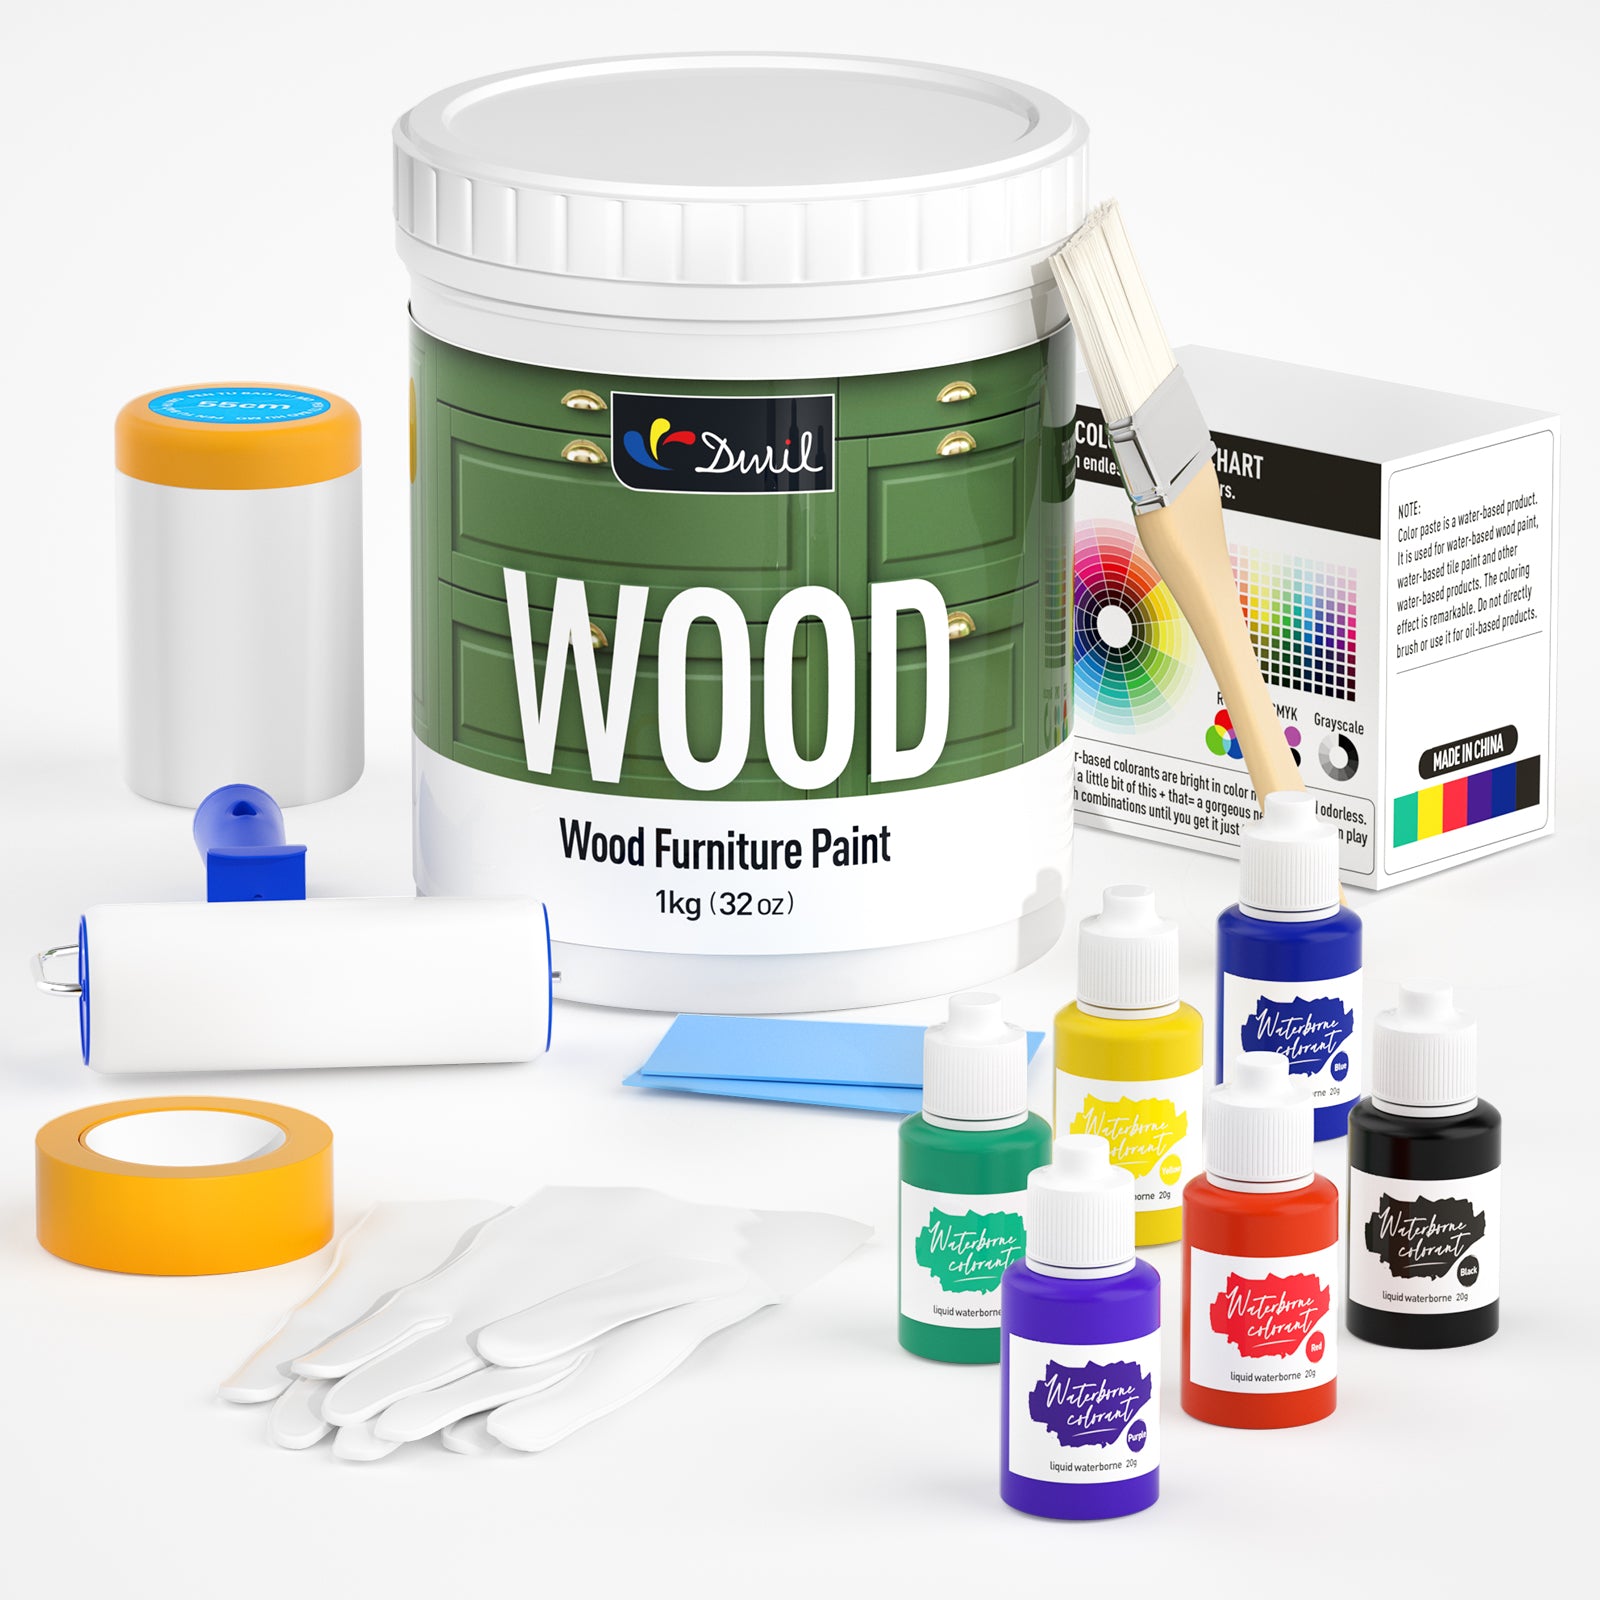 DWIL White Wood Furniture Paint with Waterbased Colorants